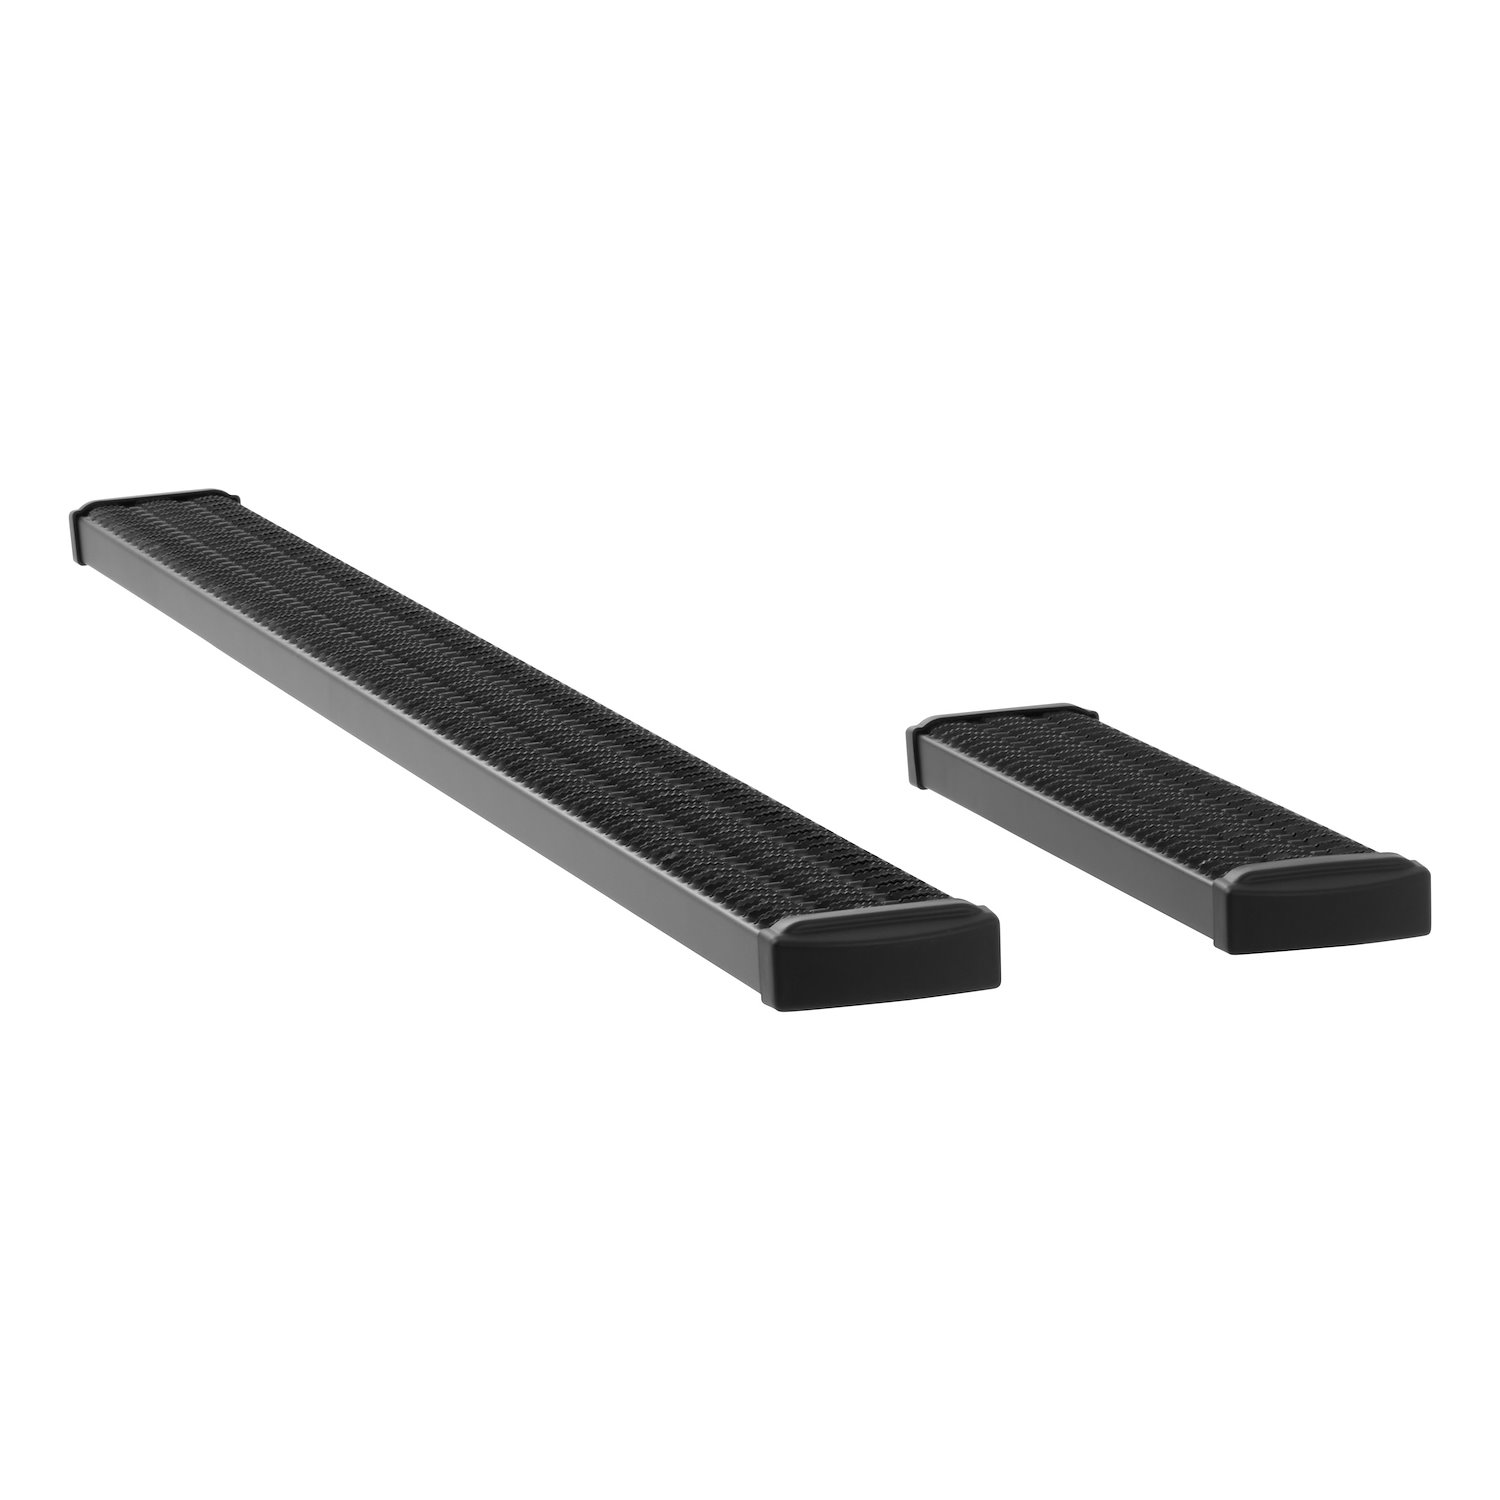 415110-401347 Grip Step 7 in. x 36 in., 110 in. Black Aluminum Running Boards Fits Select Chevy Express, GMC Savana